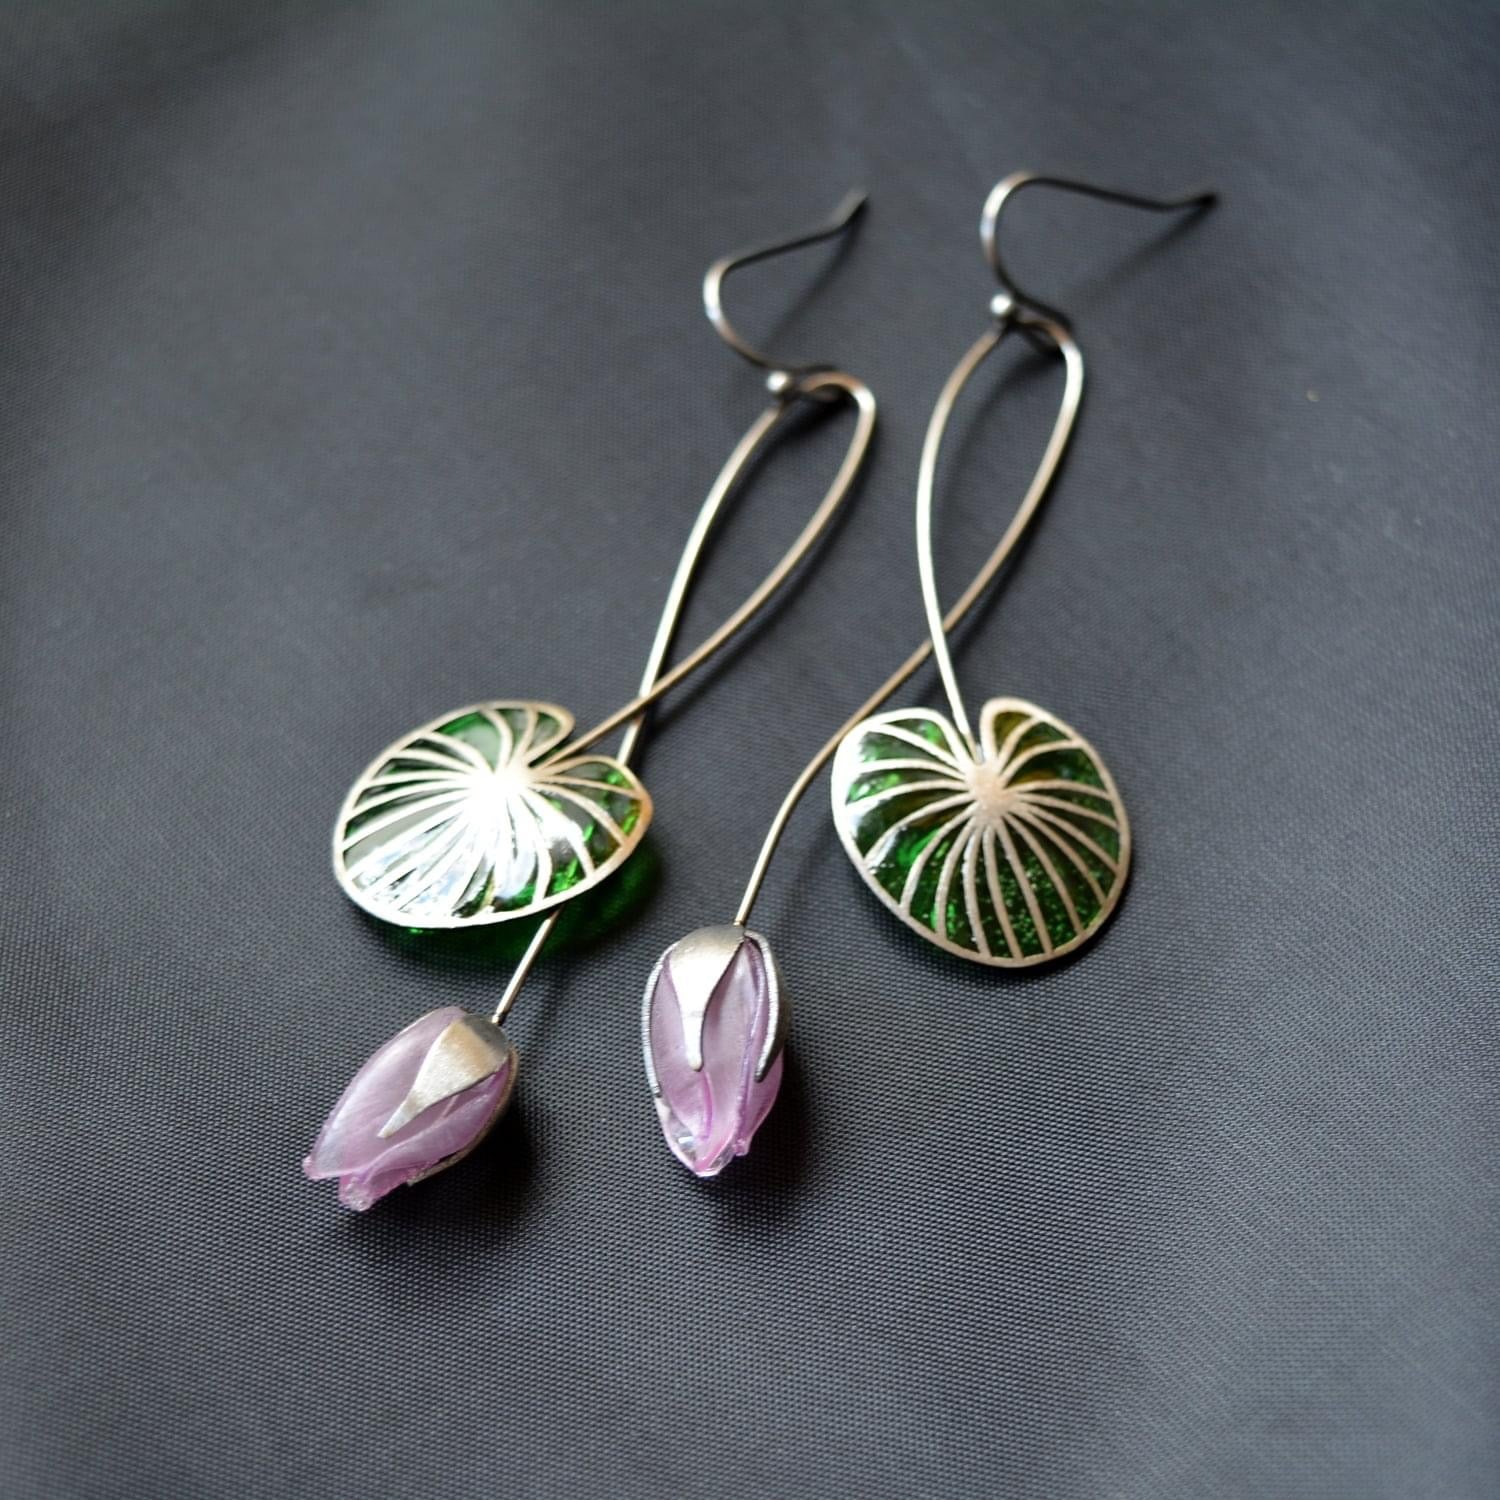 Lily pad earrings, Irena Marie, Recycled Plastic 